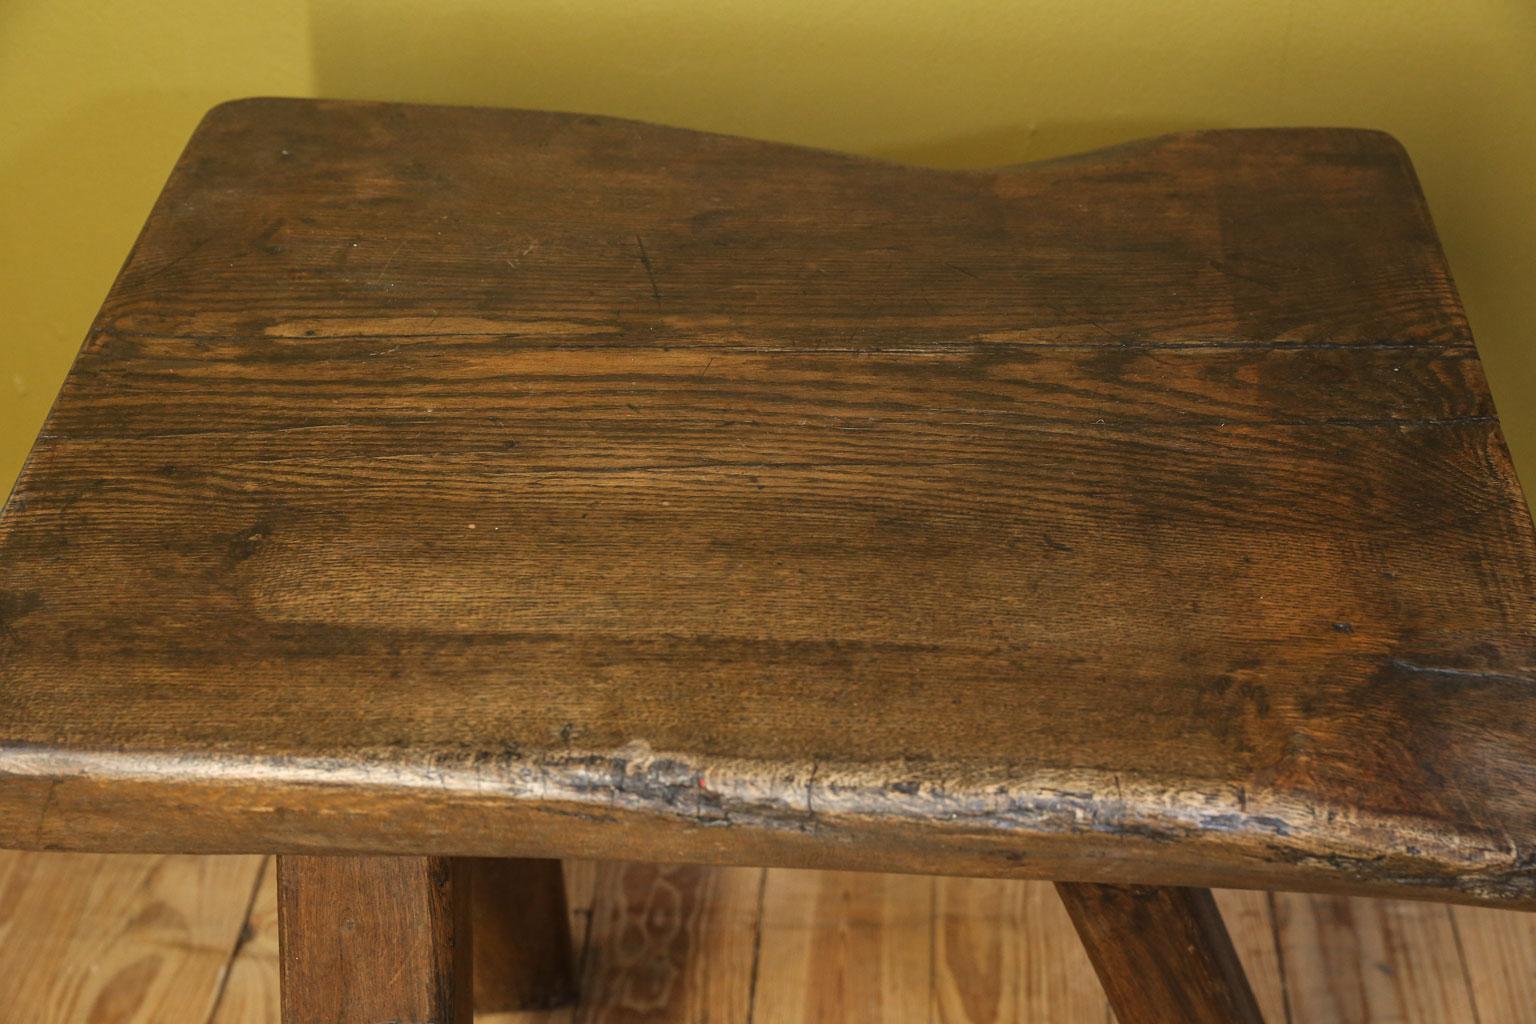 Oak Chunky Massive Side Table or Stool With a Primitive , Rustic Feel